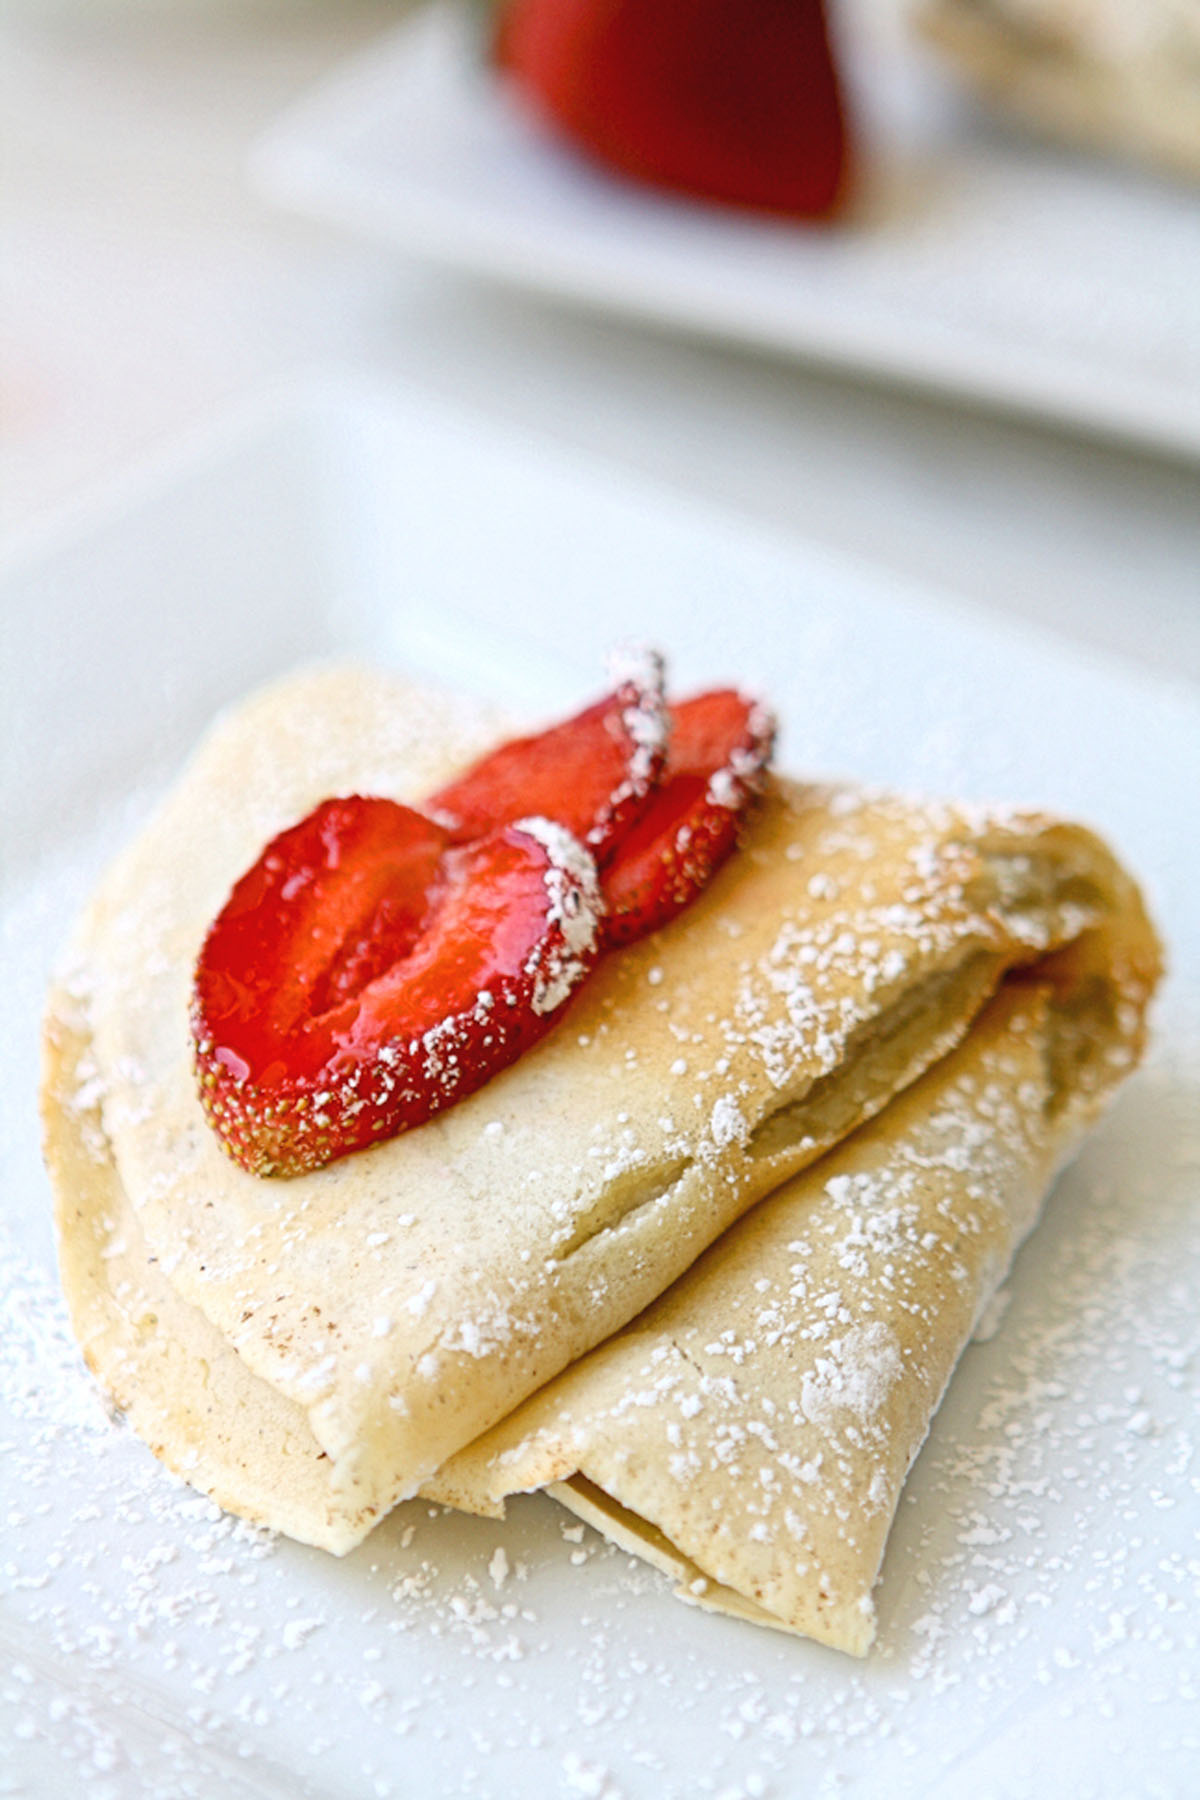 Folded mascarpone crepe topped with sliced strawberries on a white plate